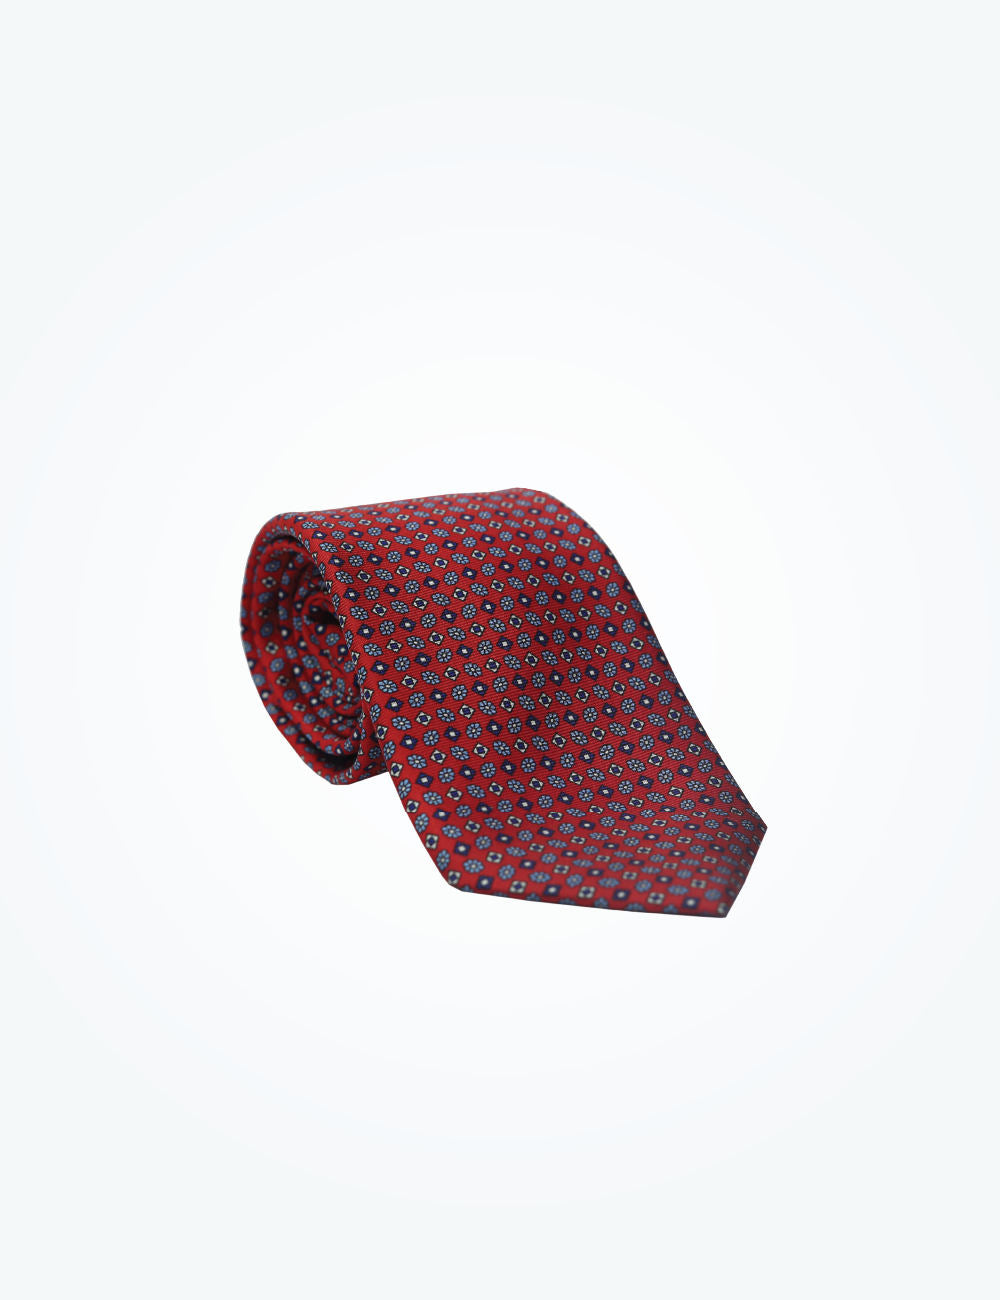 Atelier F and B Red Dotted Silk Tie